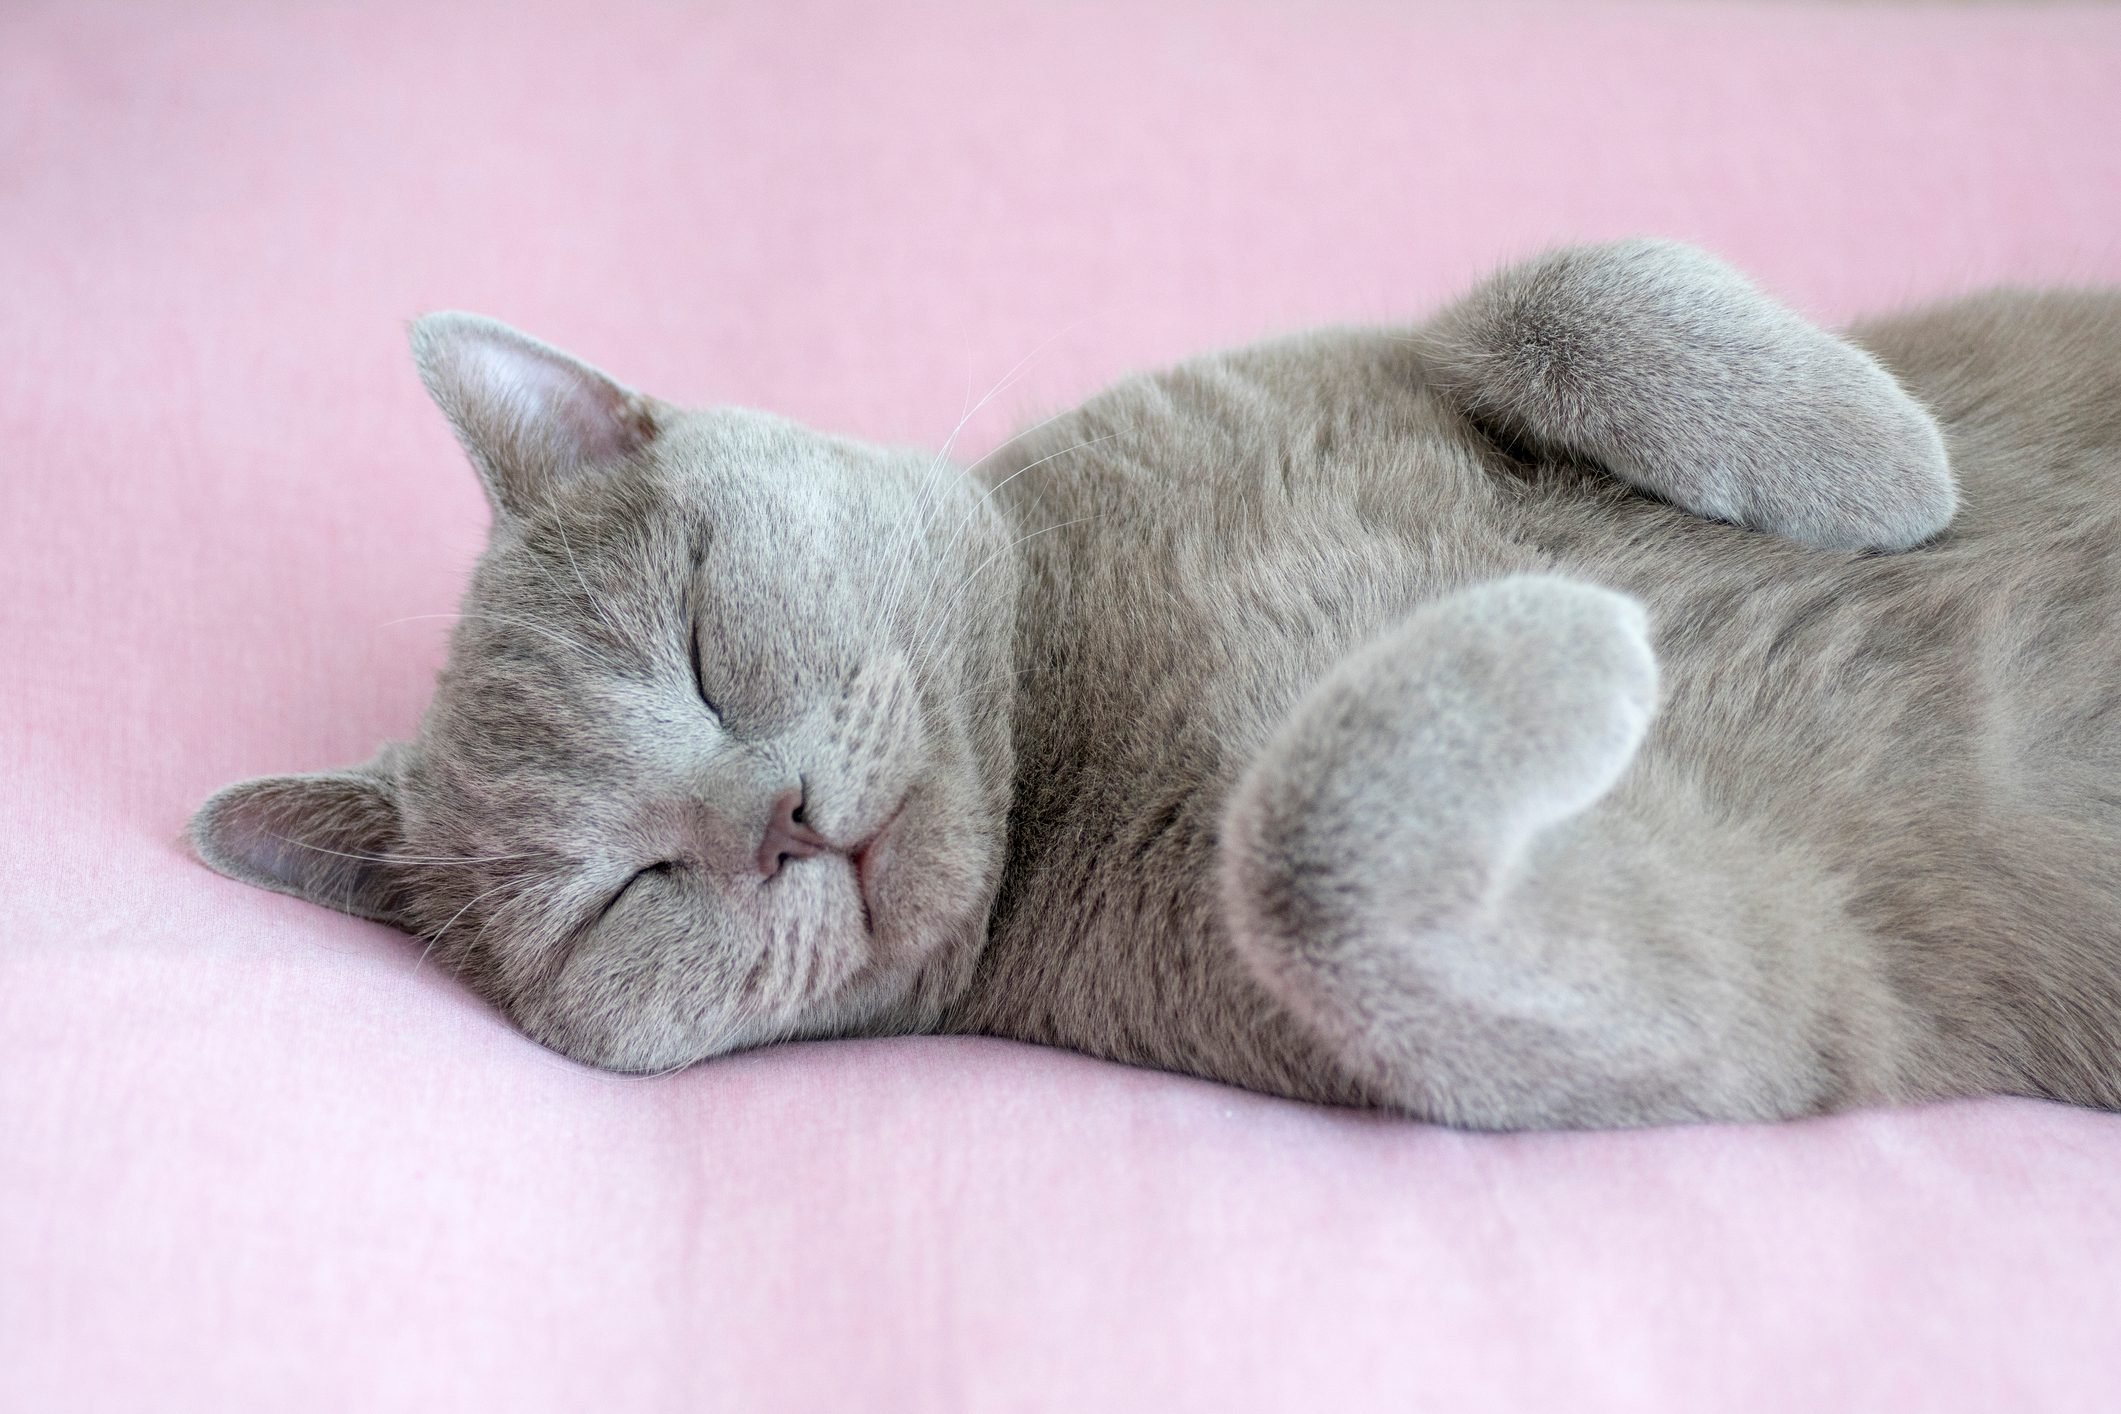 Cats Making Themselves Comfortable Anywhere | Reader's Digest